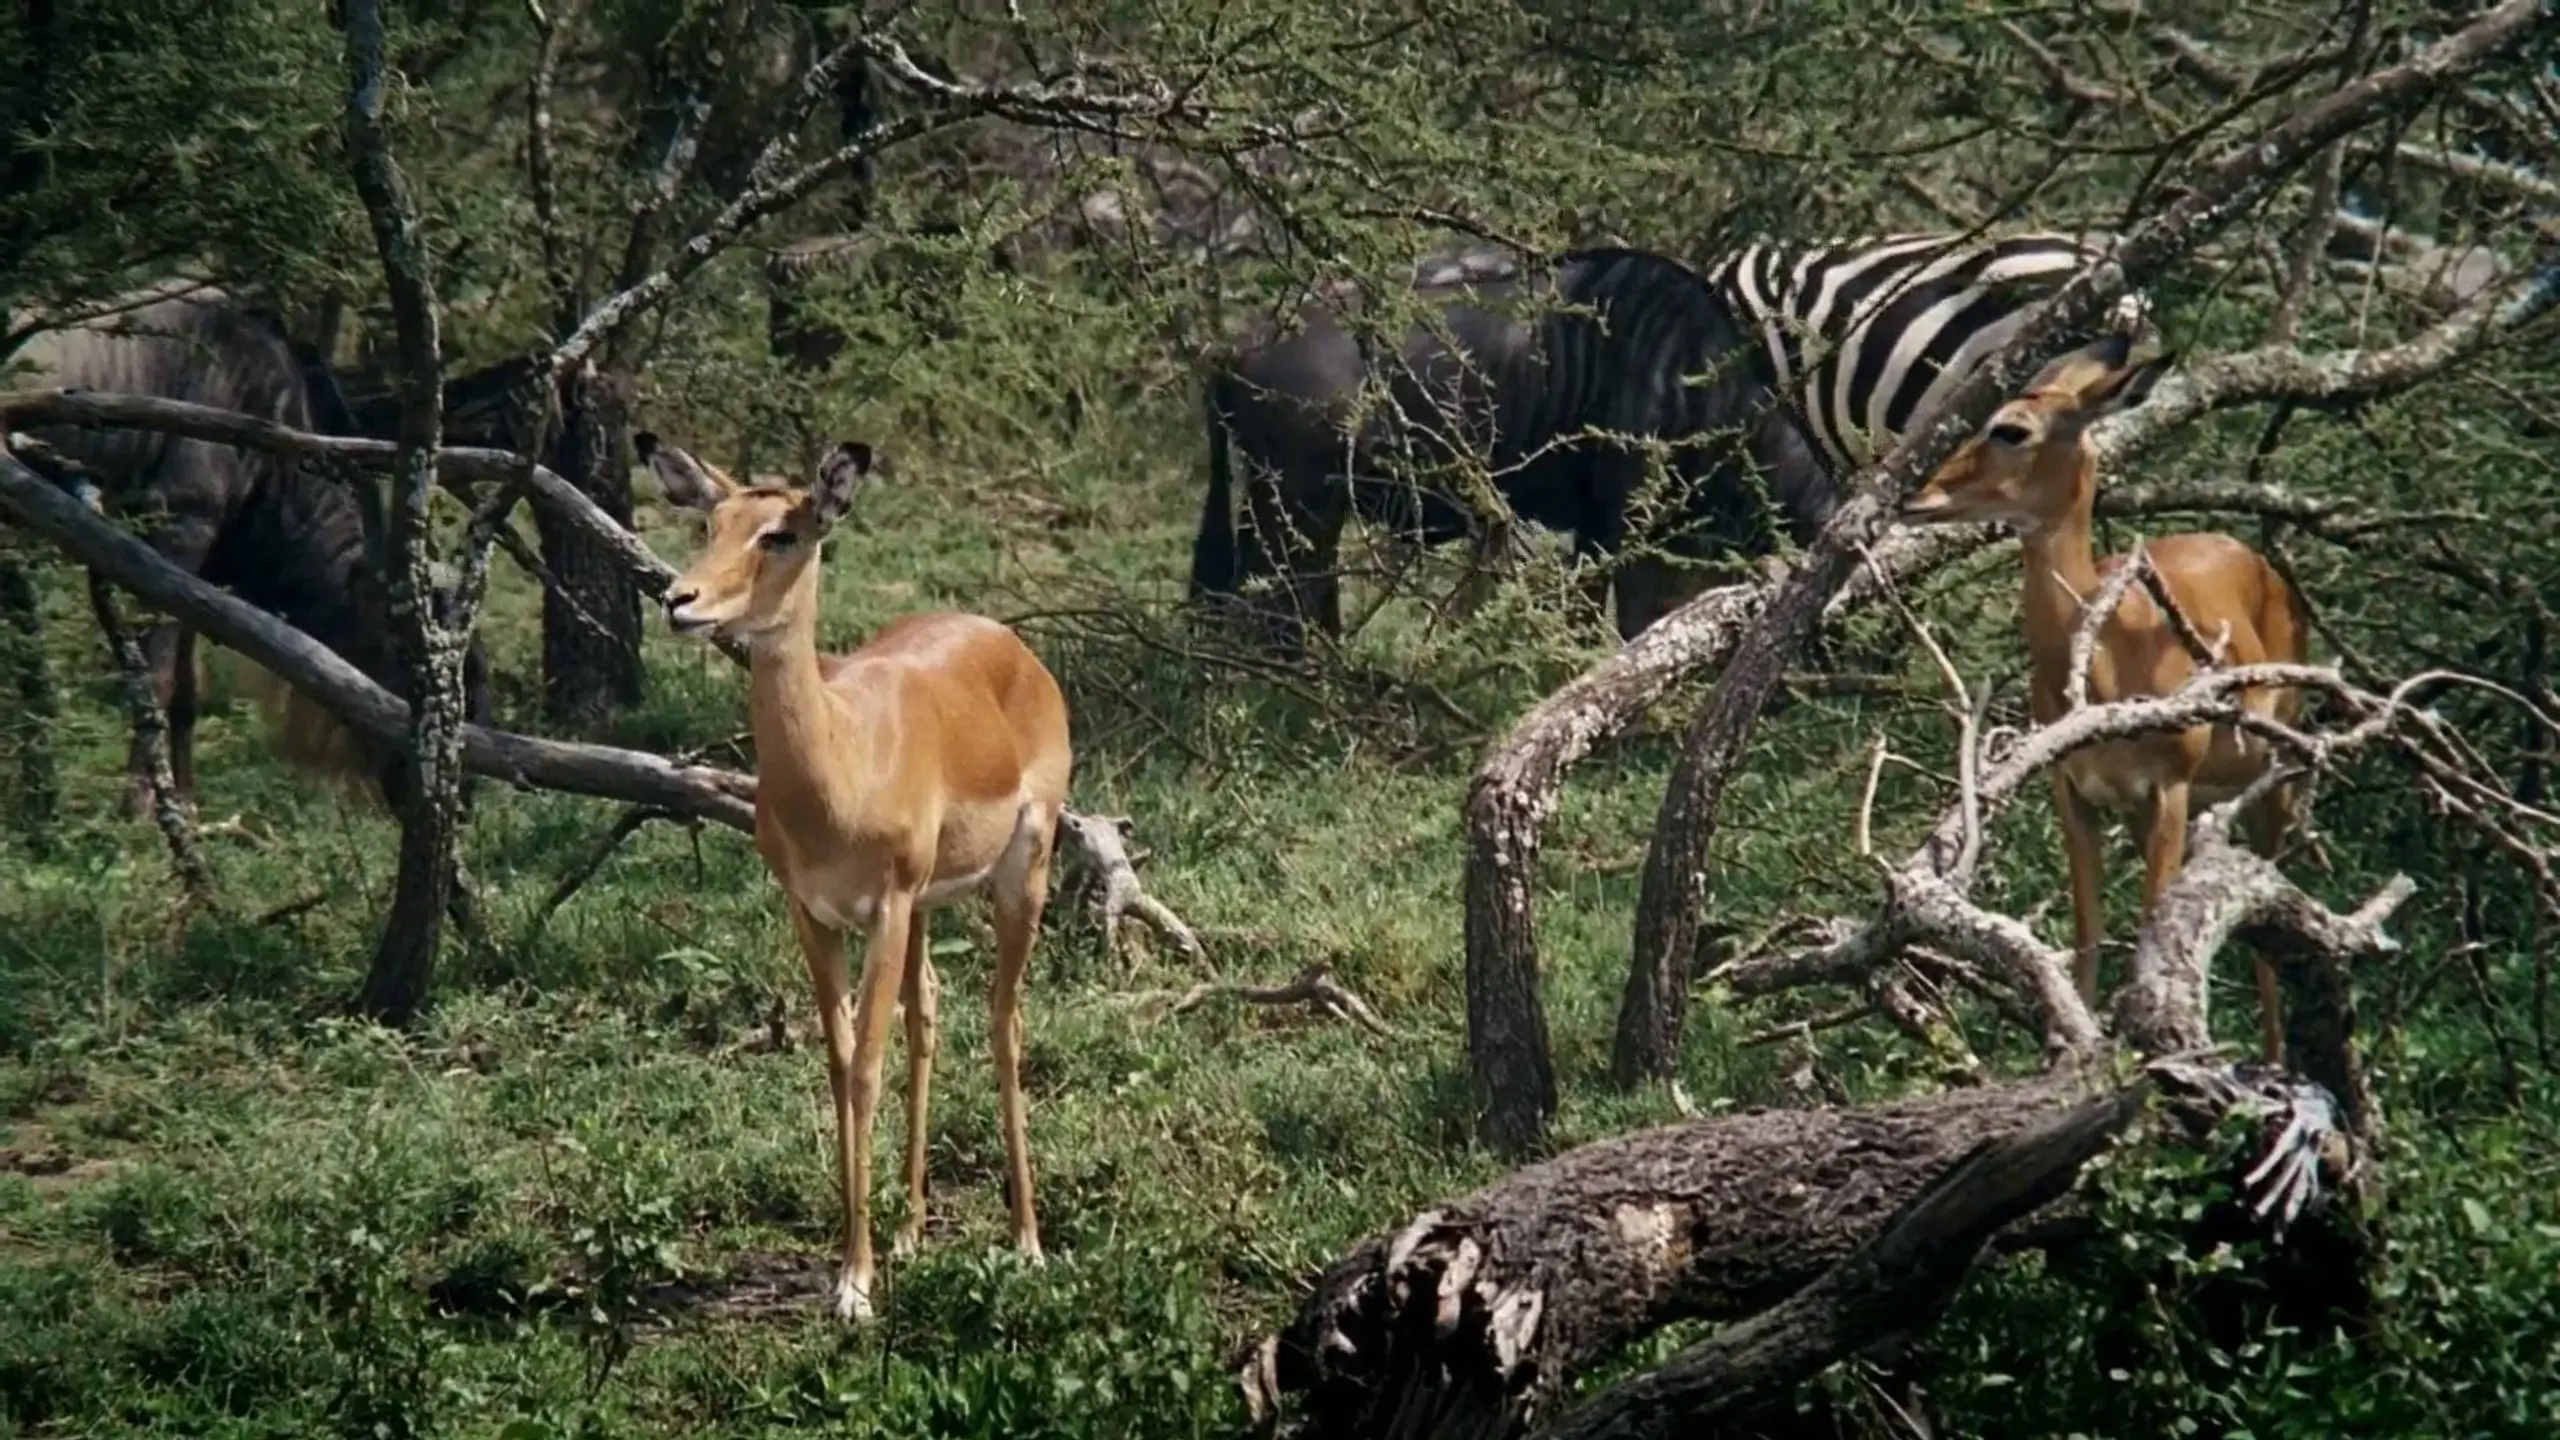 African Bambi - Die wahre 'Bambi Story'